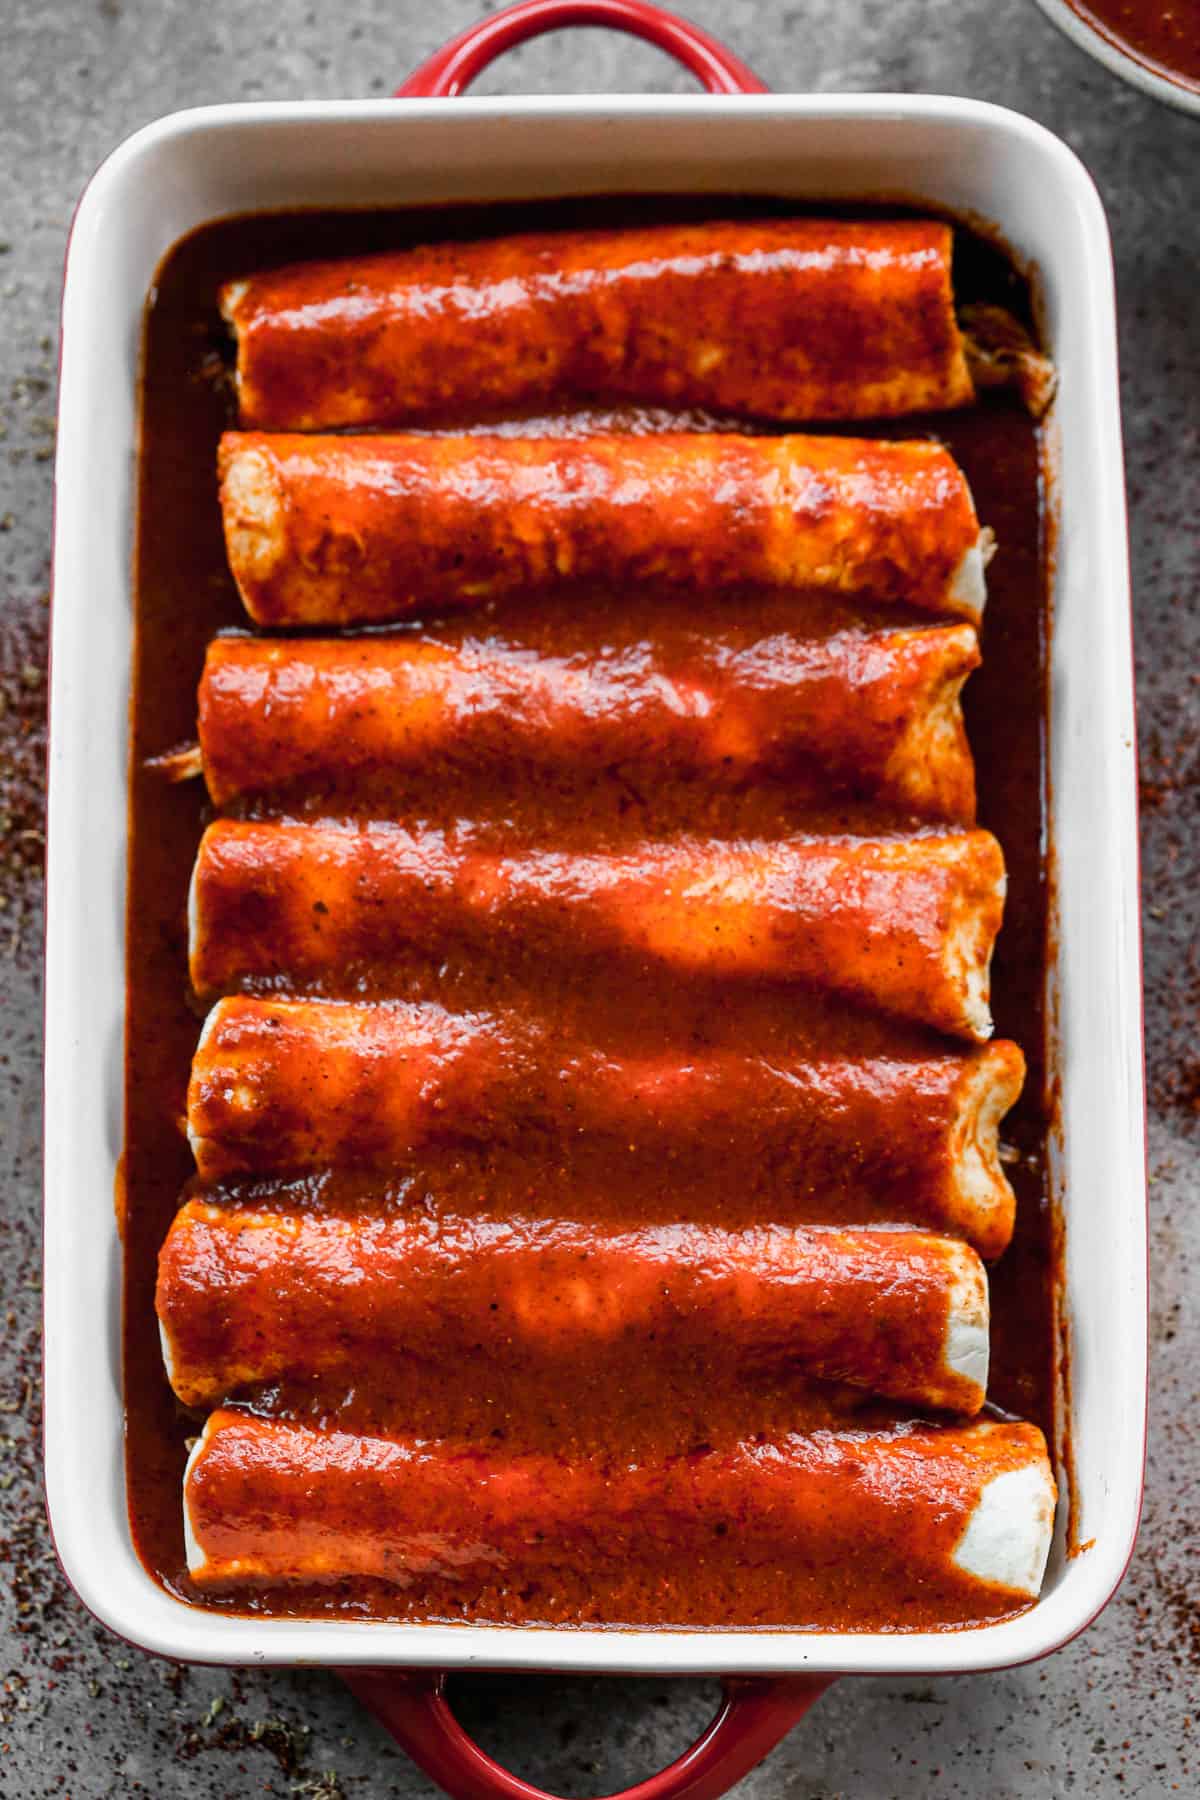 A simple Mexican enchilada sauce recipe, poured on top of cheese enchiladas.